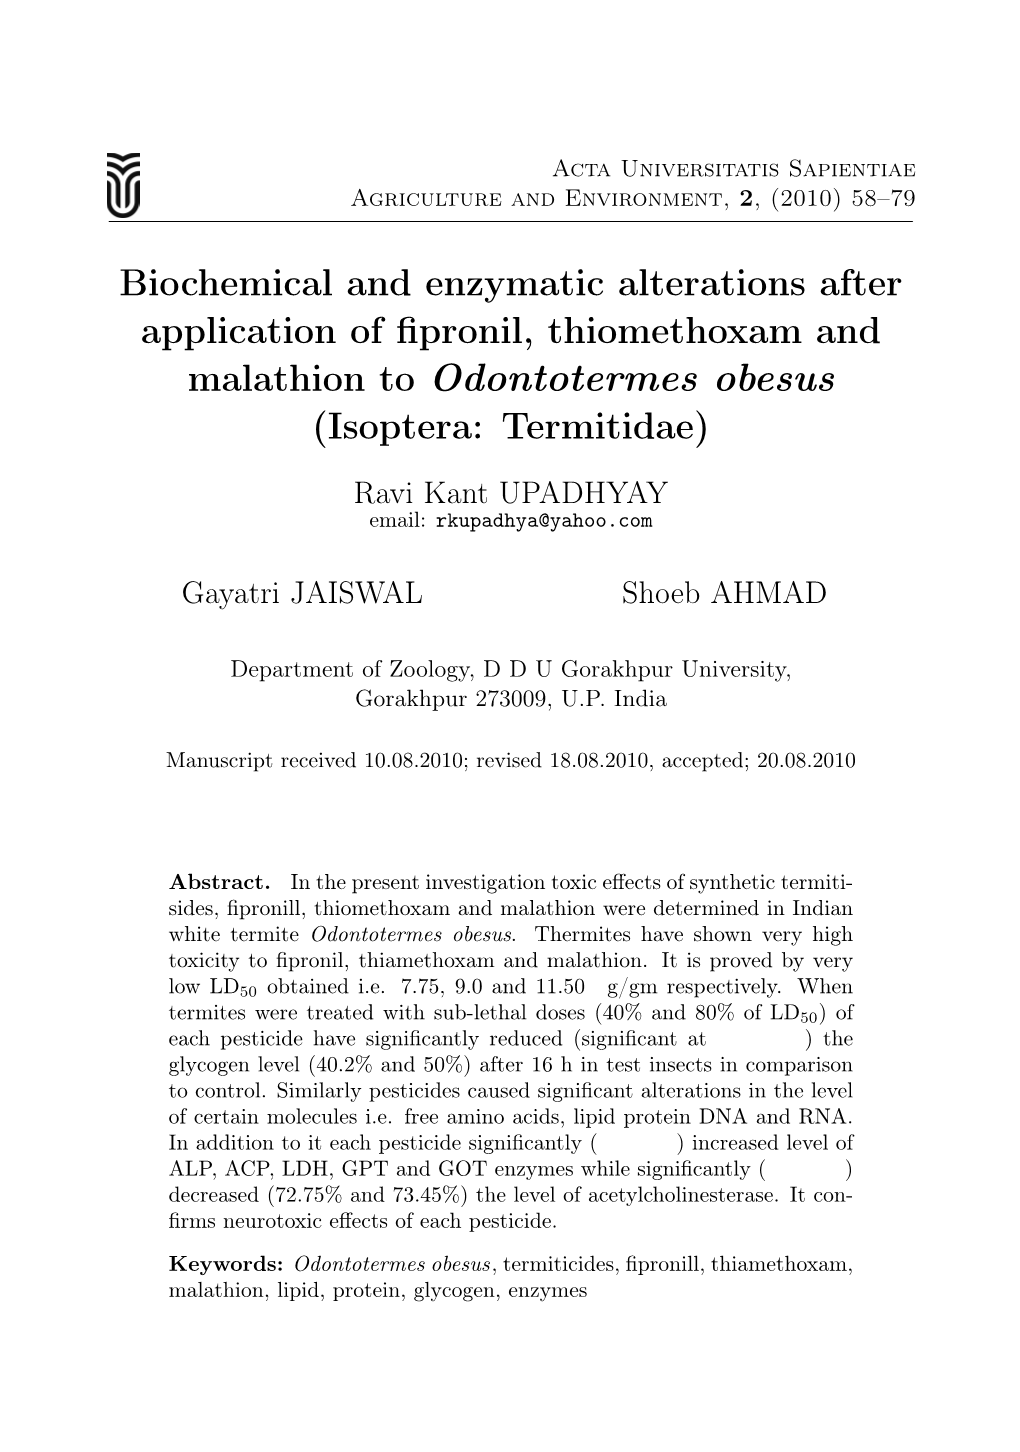 Biochemical and Enzymatic Alterations After Application of Fipronil